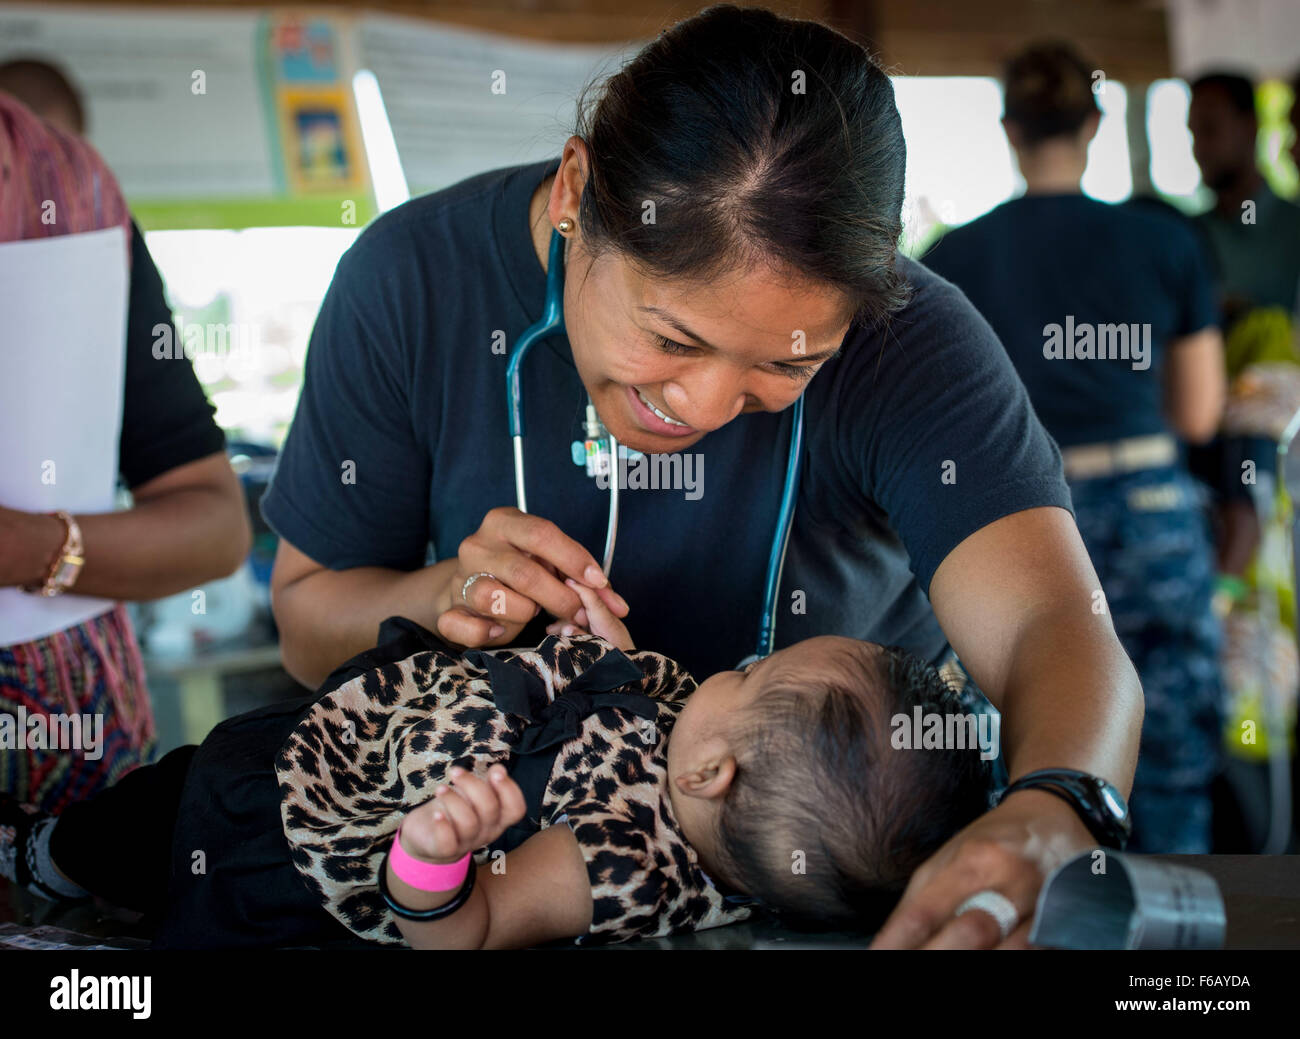 U.S. Navy Lt. Cmdr. Hannah Castillo, a nurse from Urbana, Md., measures a Fijian baby’s height during Pacific Partnership 2015 (PP15) in Savusavu, Fiji, 12 June 2015. Service members and non-governmental organizations from the hospital ship USNS Mercy (T-AH 19) held a community health engagement in Seaqaqa, Fiji, and surrounding areas. The Mercy is currently participating in  PP15 which is in its 10th iteration and is the largest annual multilateral humanitarian assistance and disaster relief preparedness mission conducted in the Indo-Asia-Pacific region. While training for crisis conditions,  Stock Photo